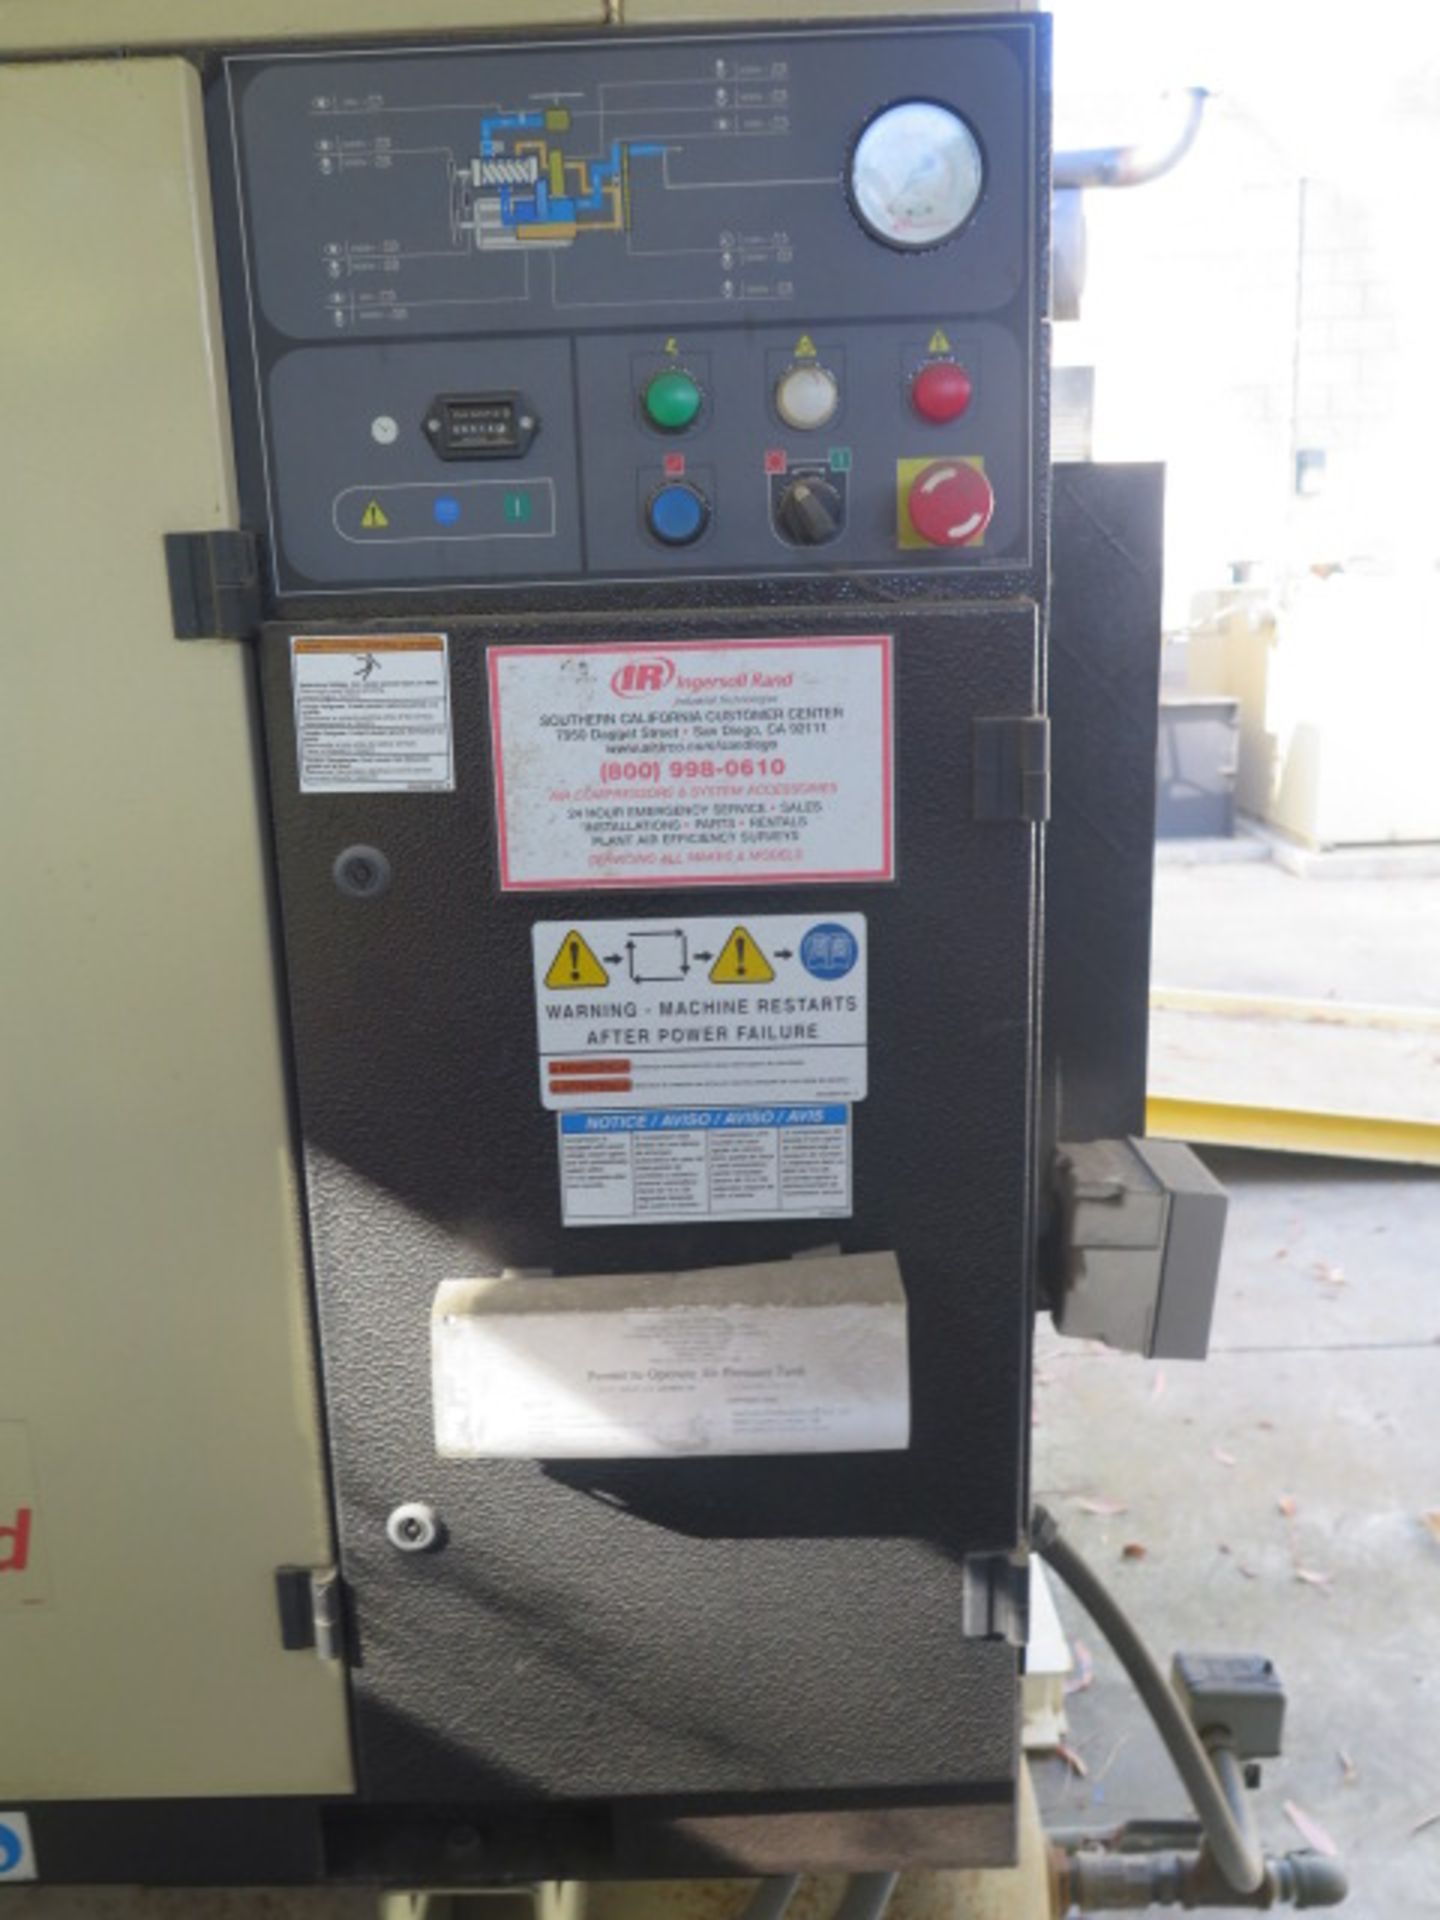 2007 Ingersoll Rand SSR-UP6-30-125 30Hp Rotary Air Compressor / Dryer Combo s/n PX9880U08011 w/ - Image 3 of 7